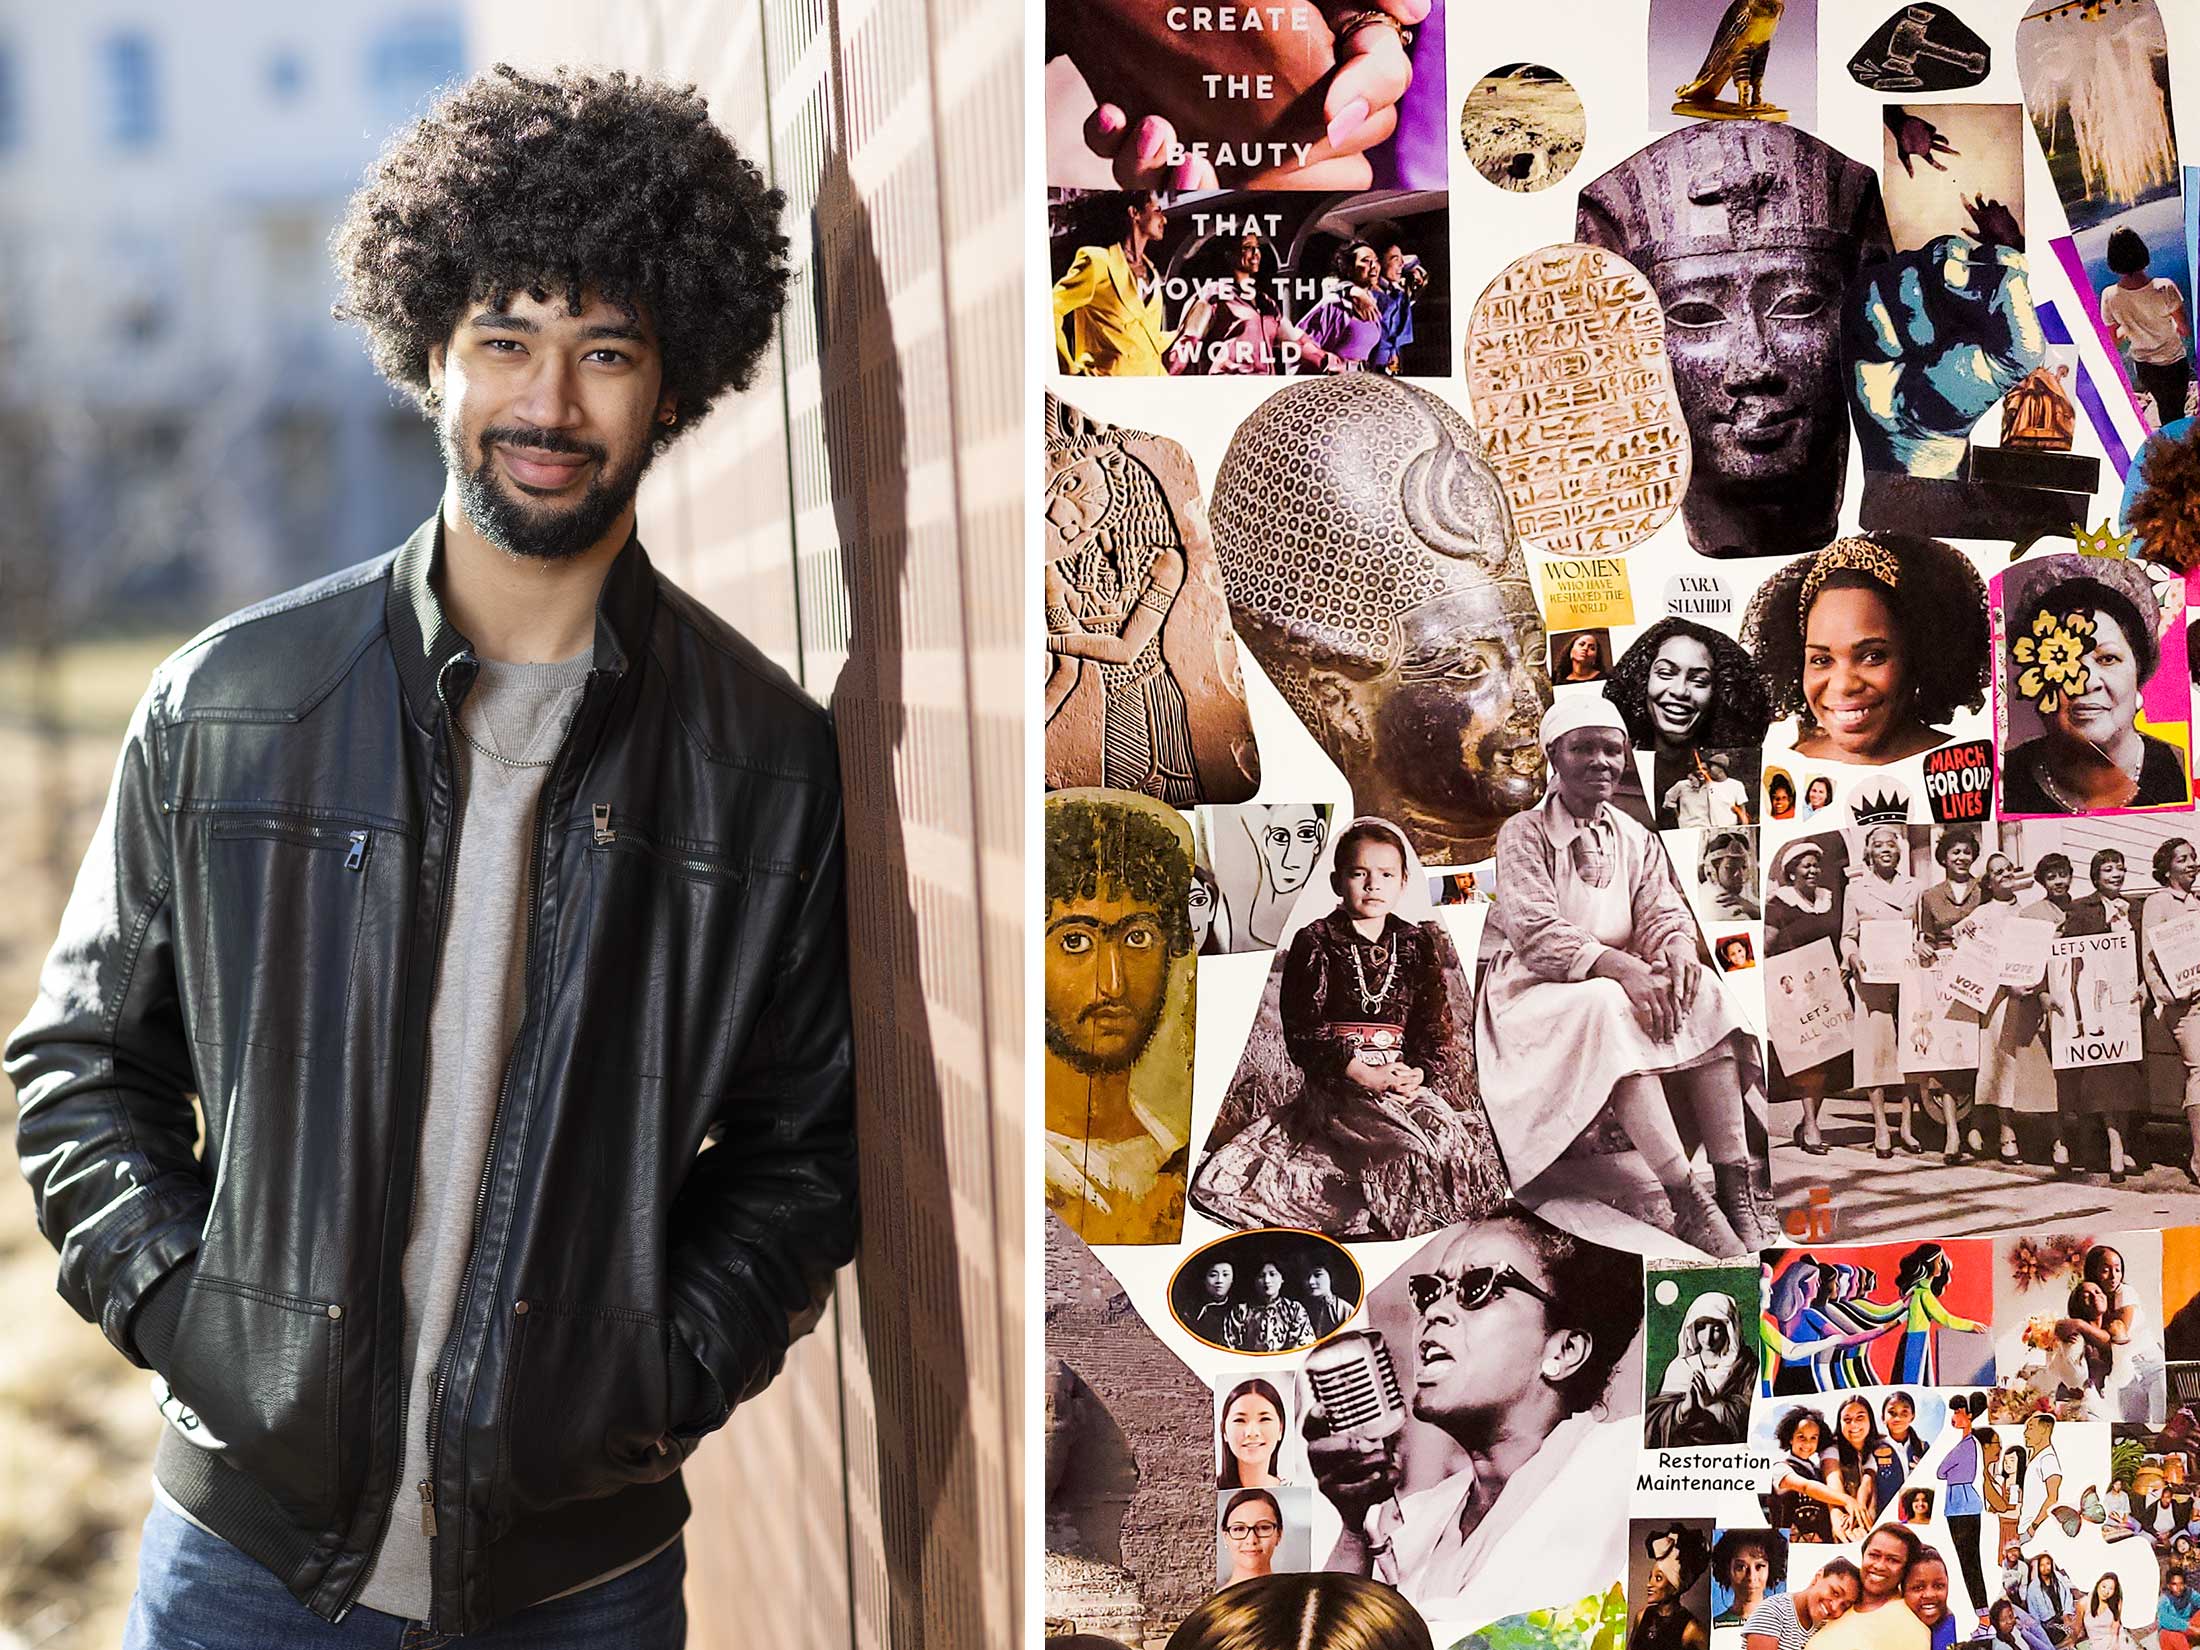 A young Black man, smiling, in a leather jacket leans agains a brick building. And an art collage of Black women.